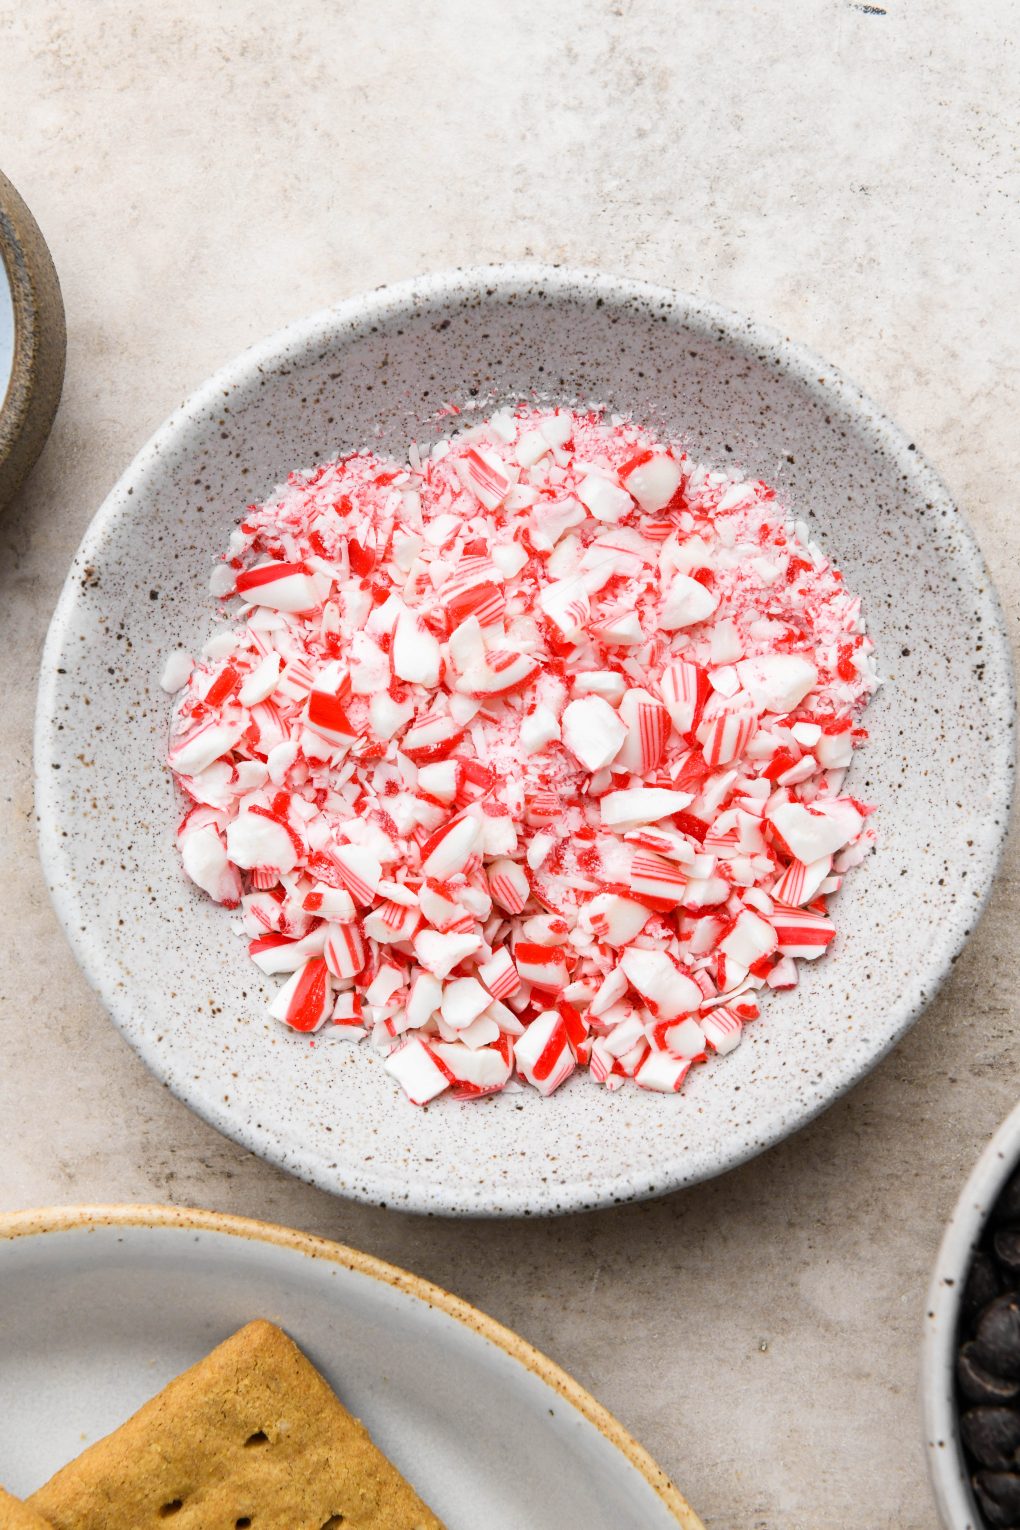 Ingredients images for chocolate peppermint covered graham crackers: Small bowl of crushed candy canes.